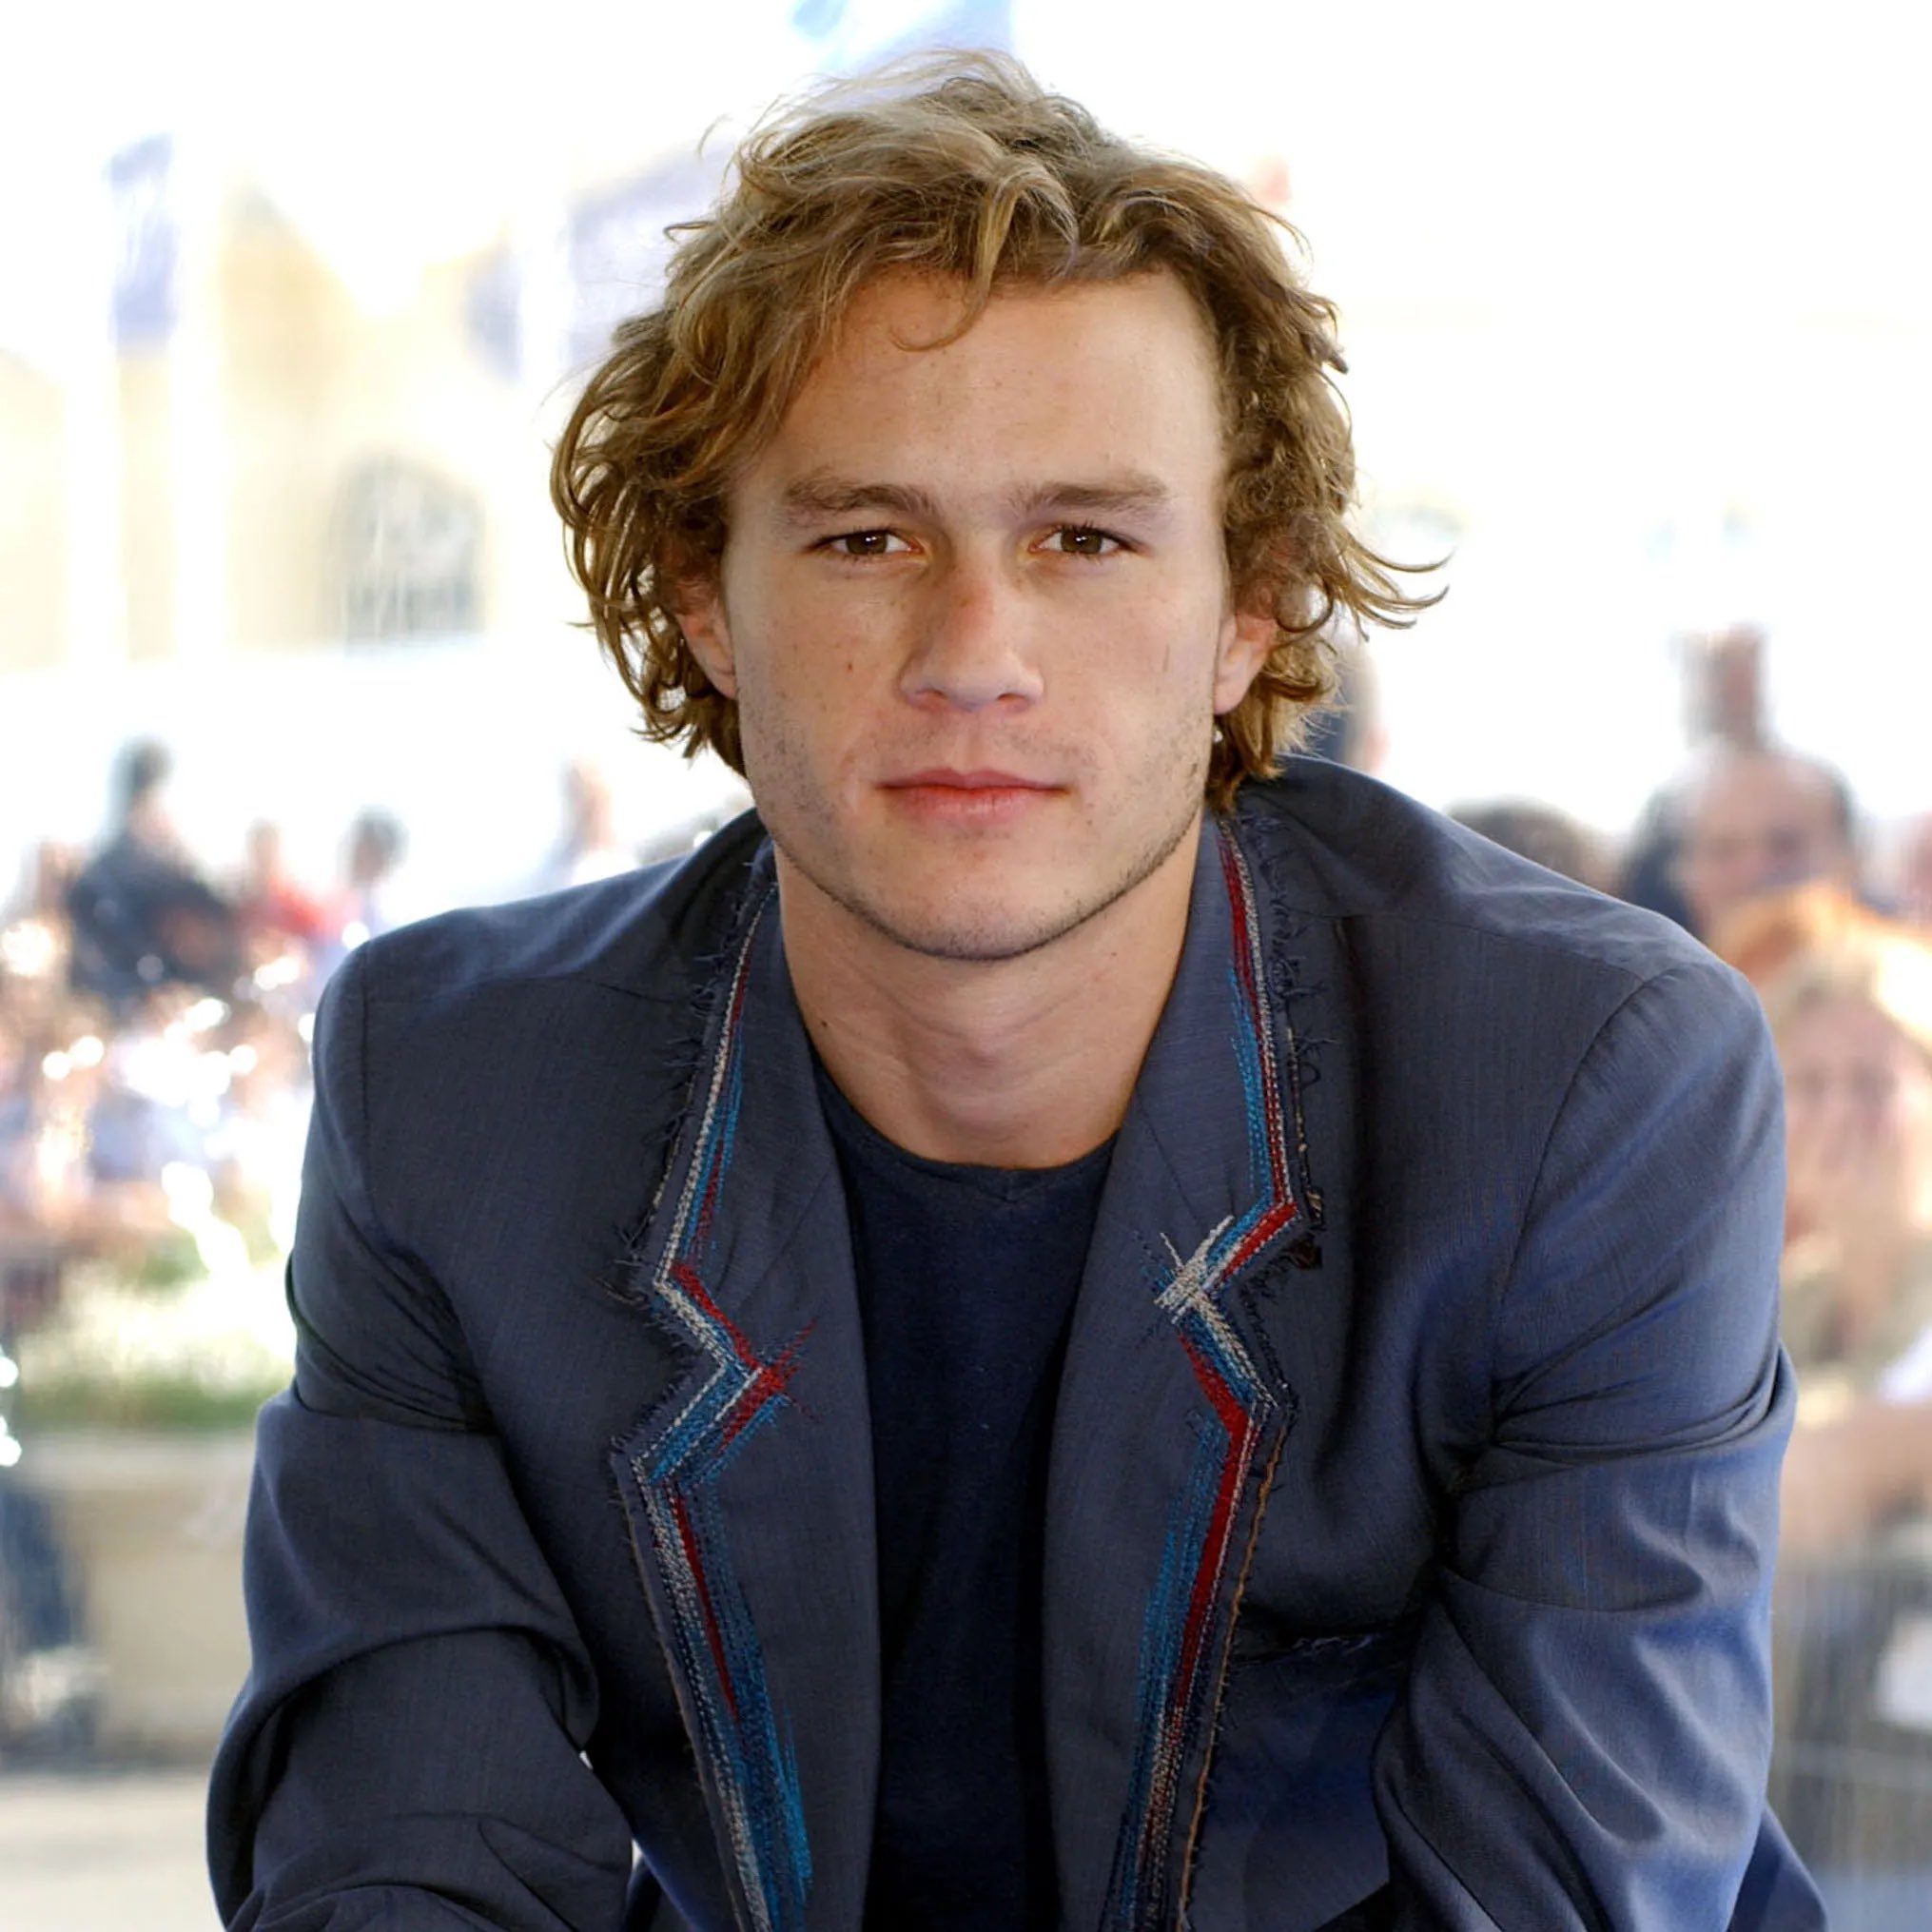 Happy birthday to the late, great Heath Ledger. 